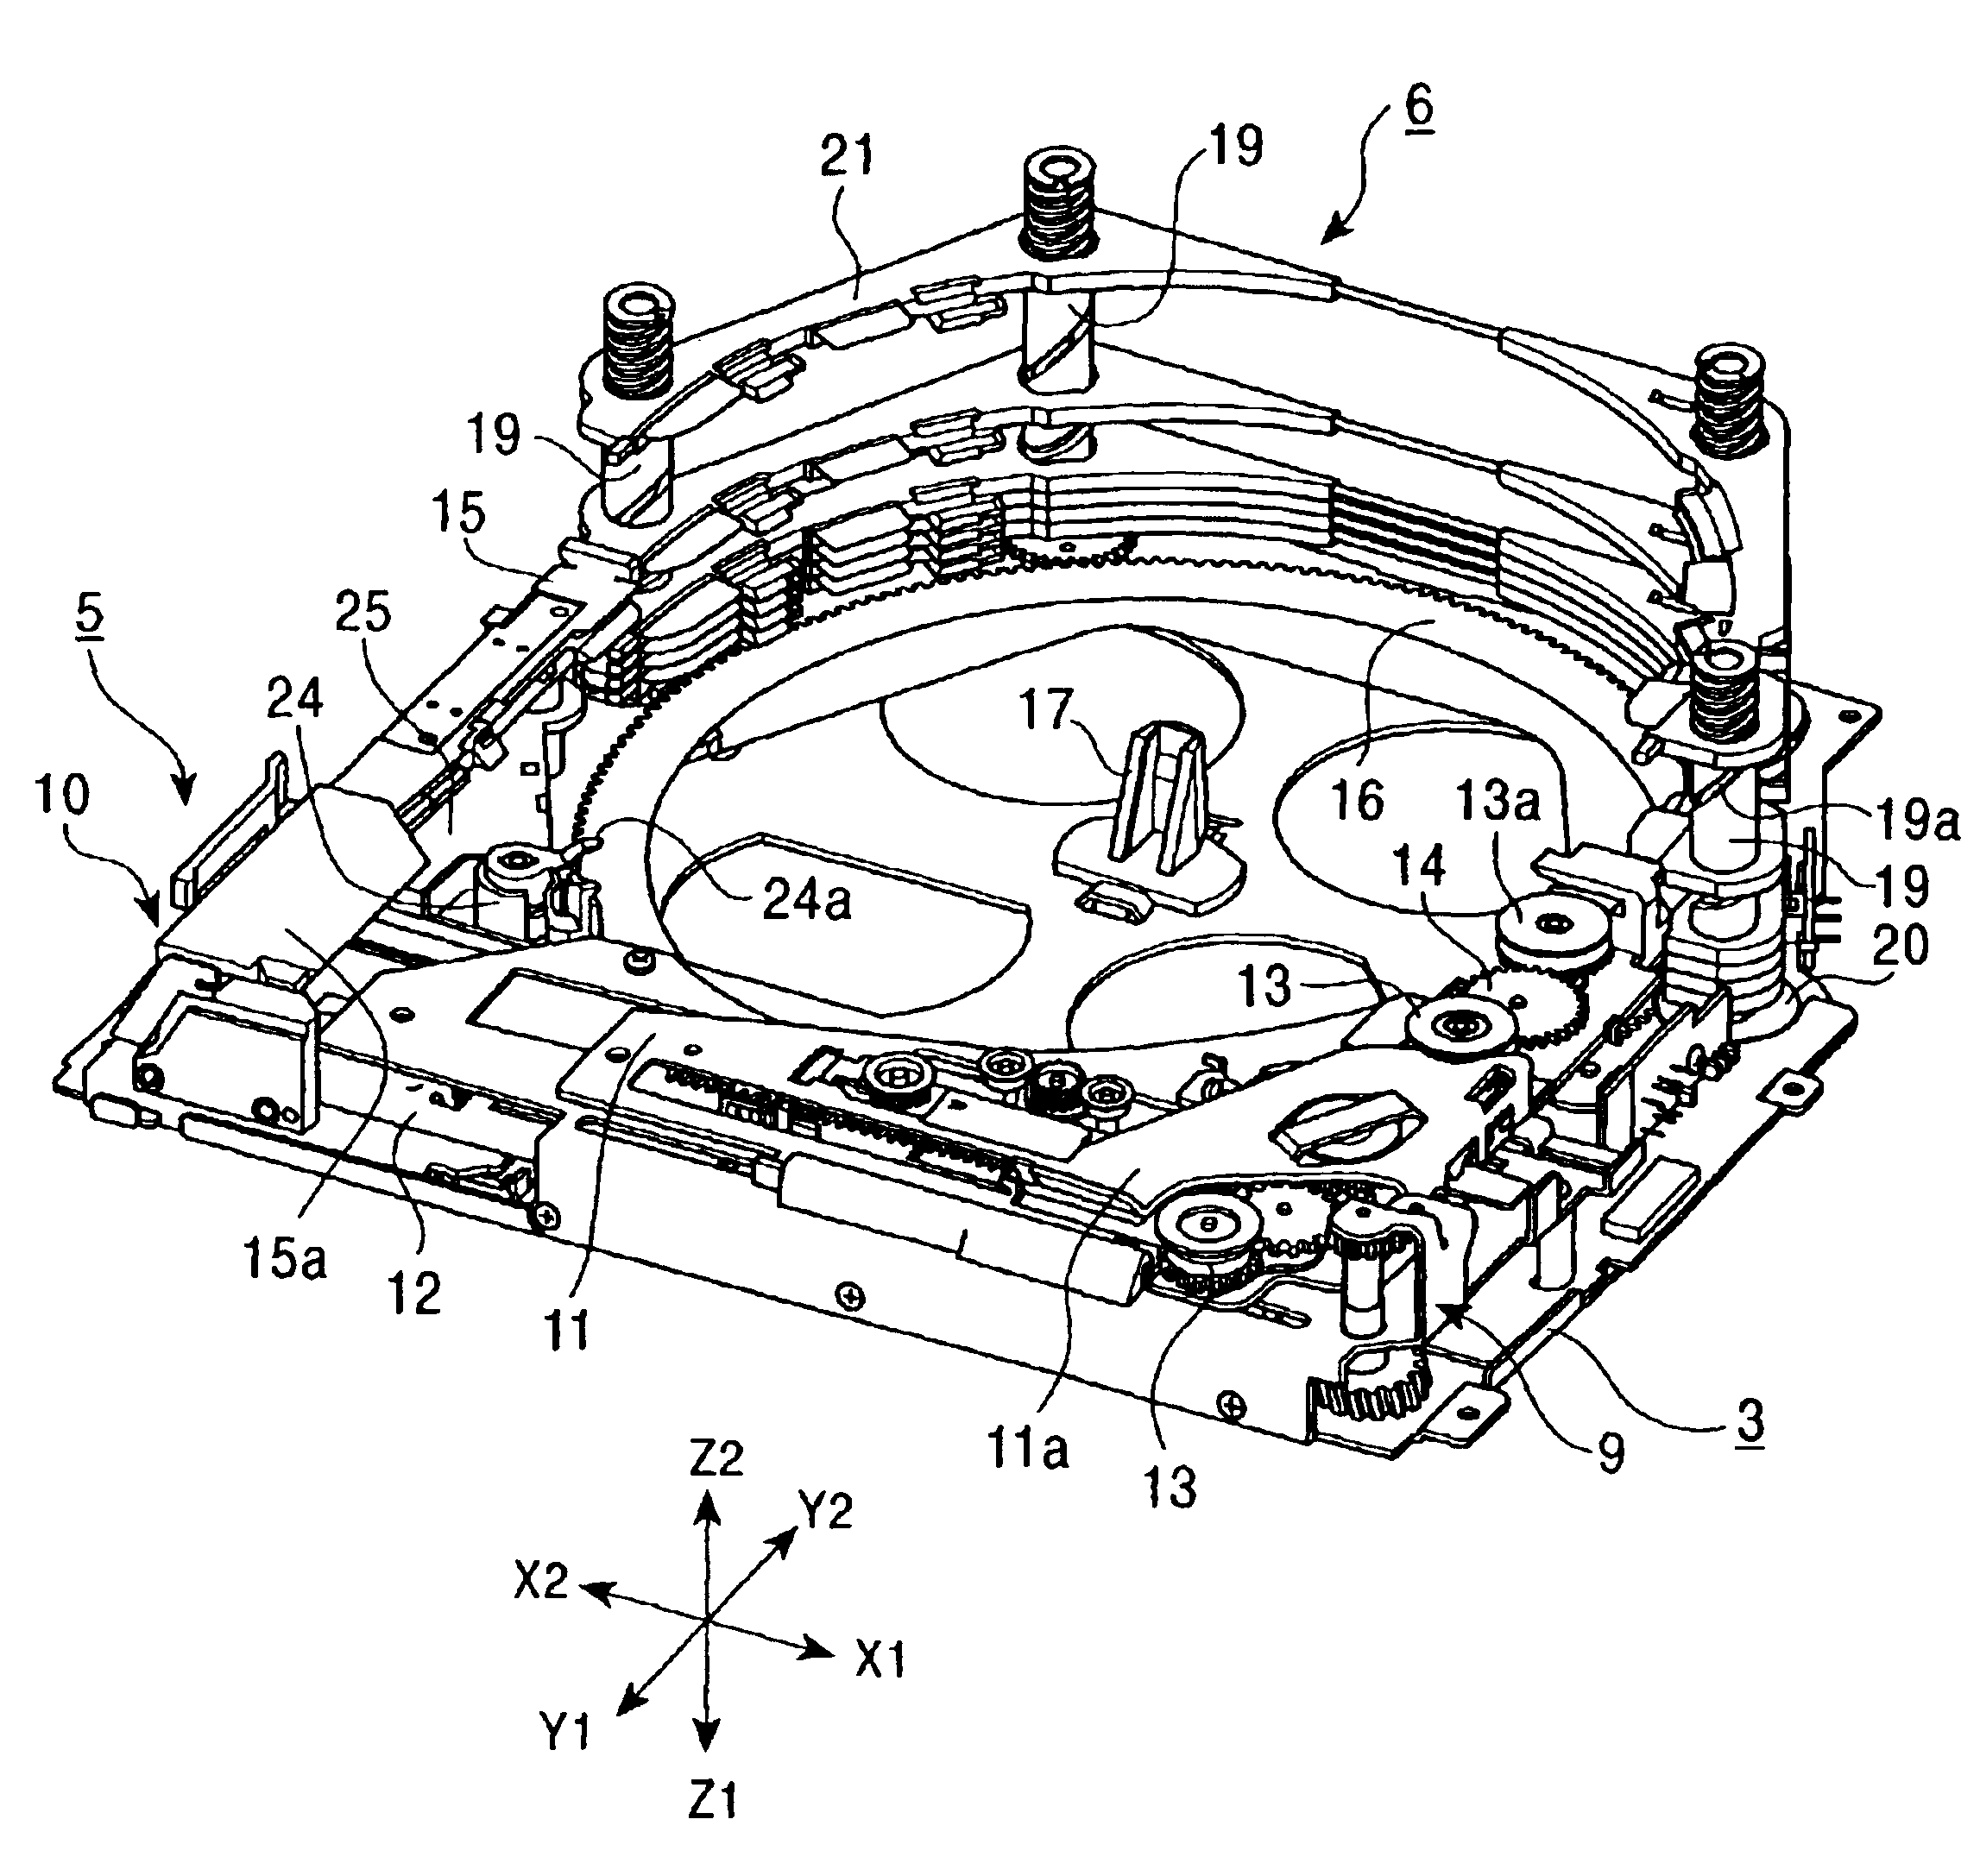 Changer-type disk device